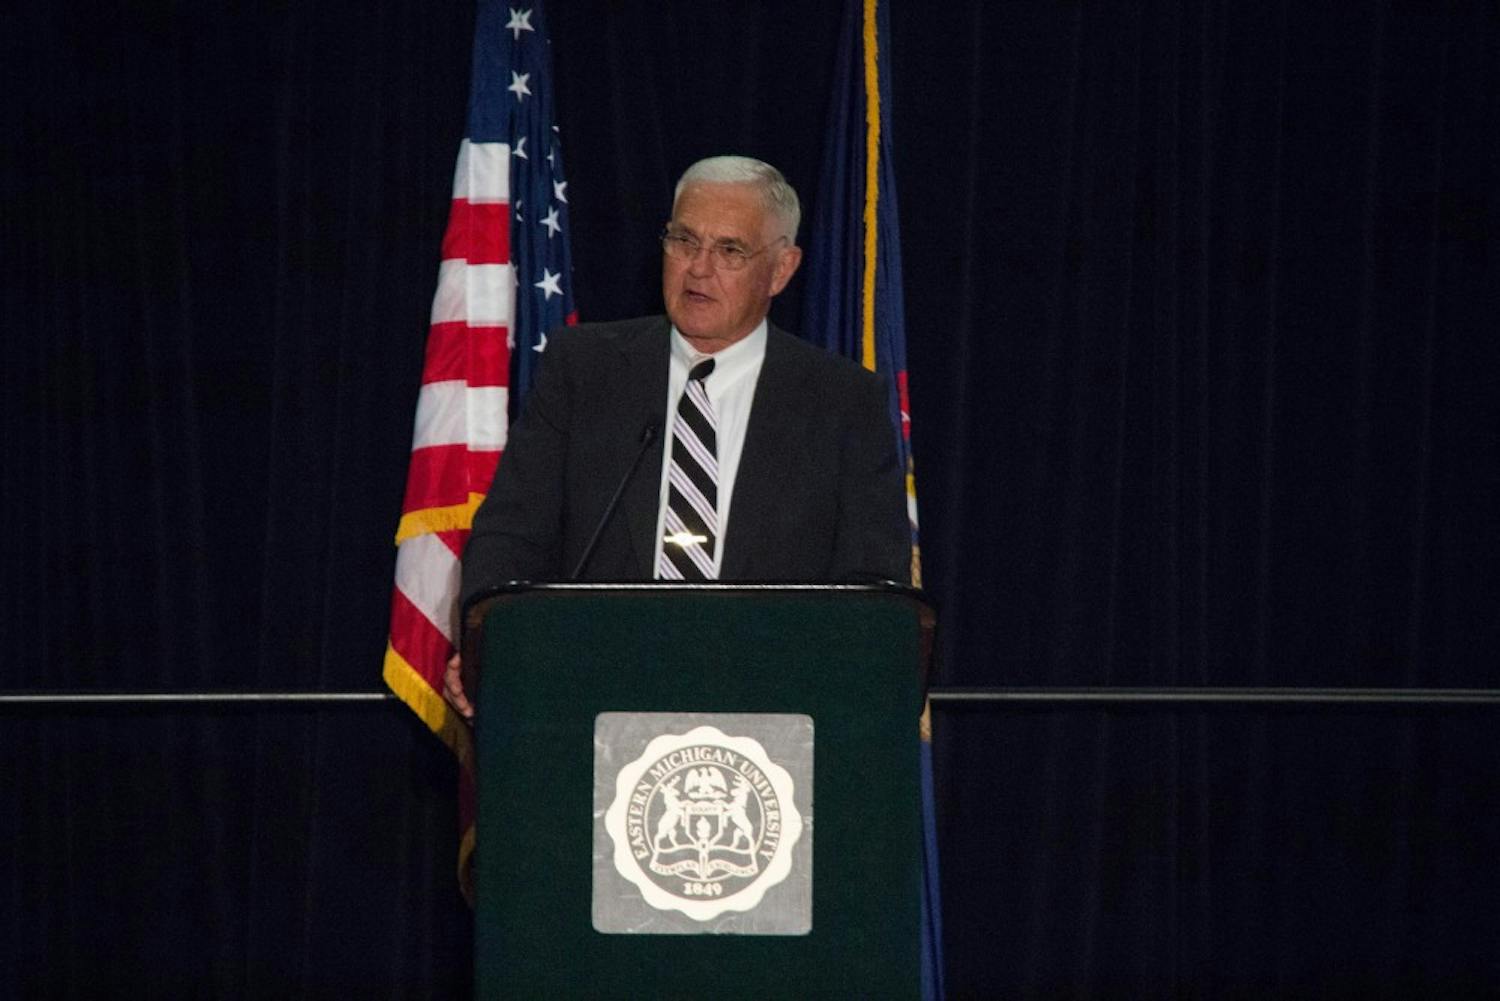 	Bob Lutz visited EMU on June 4 to talk about leadership.